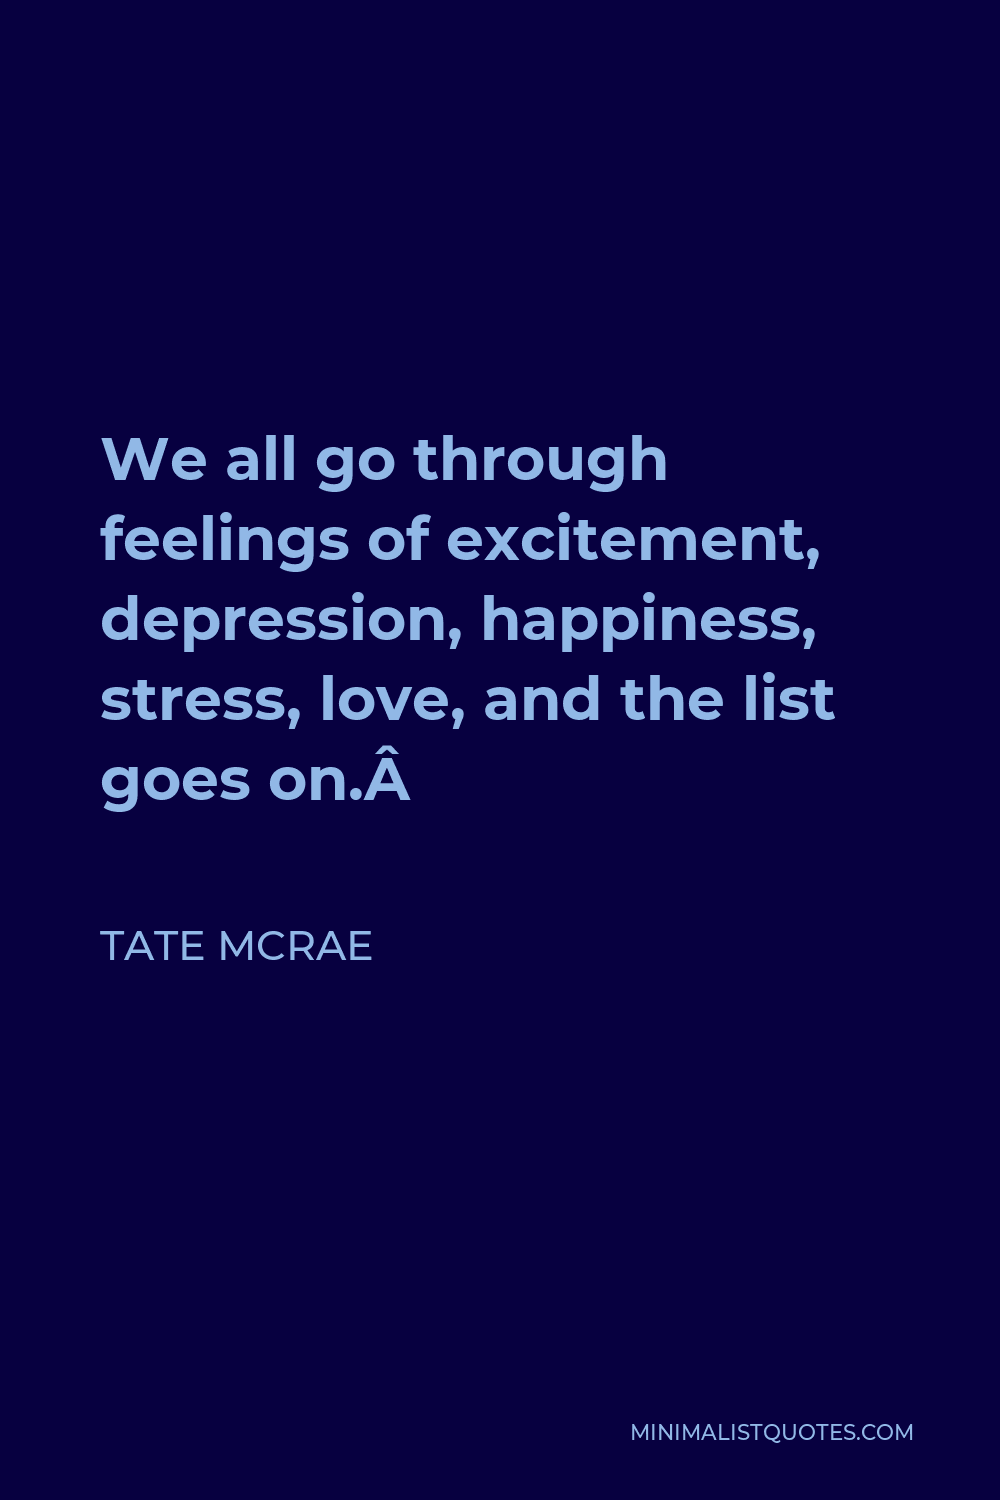 Tate McRae Quote - We all go through feelings of excitement, depression, happiness, stress, love, and the list goes on. 